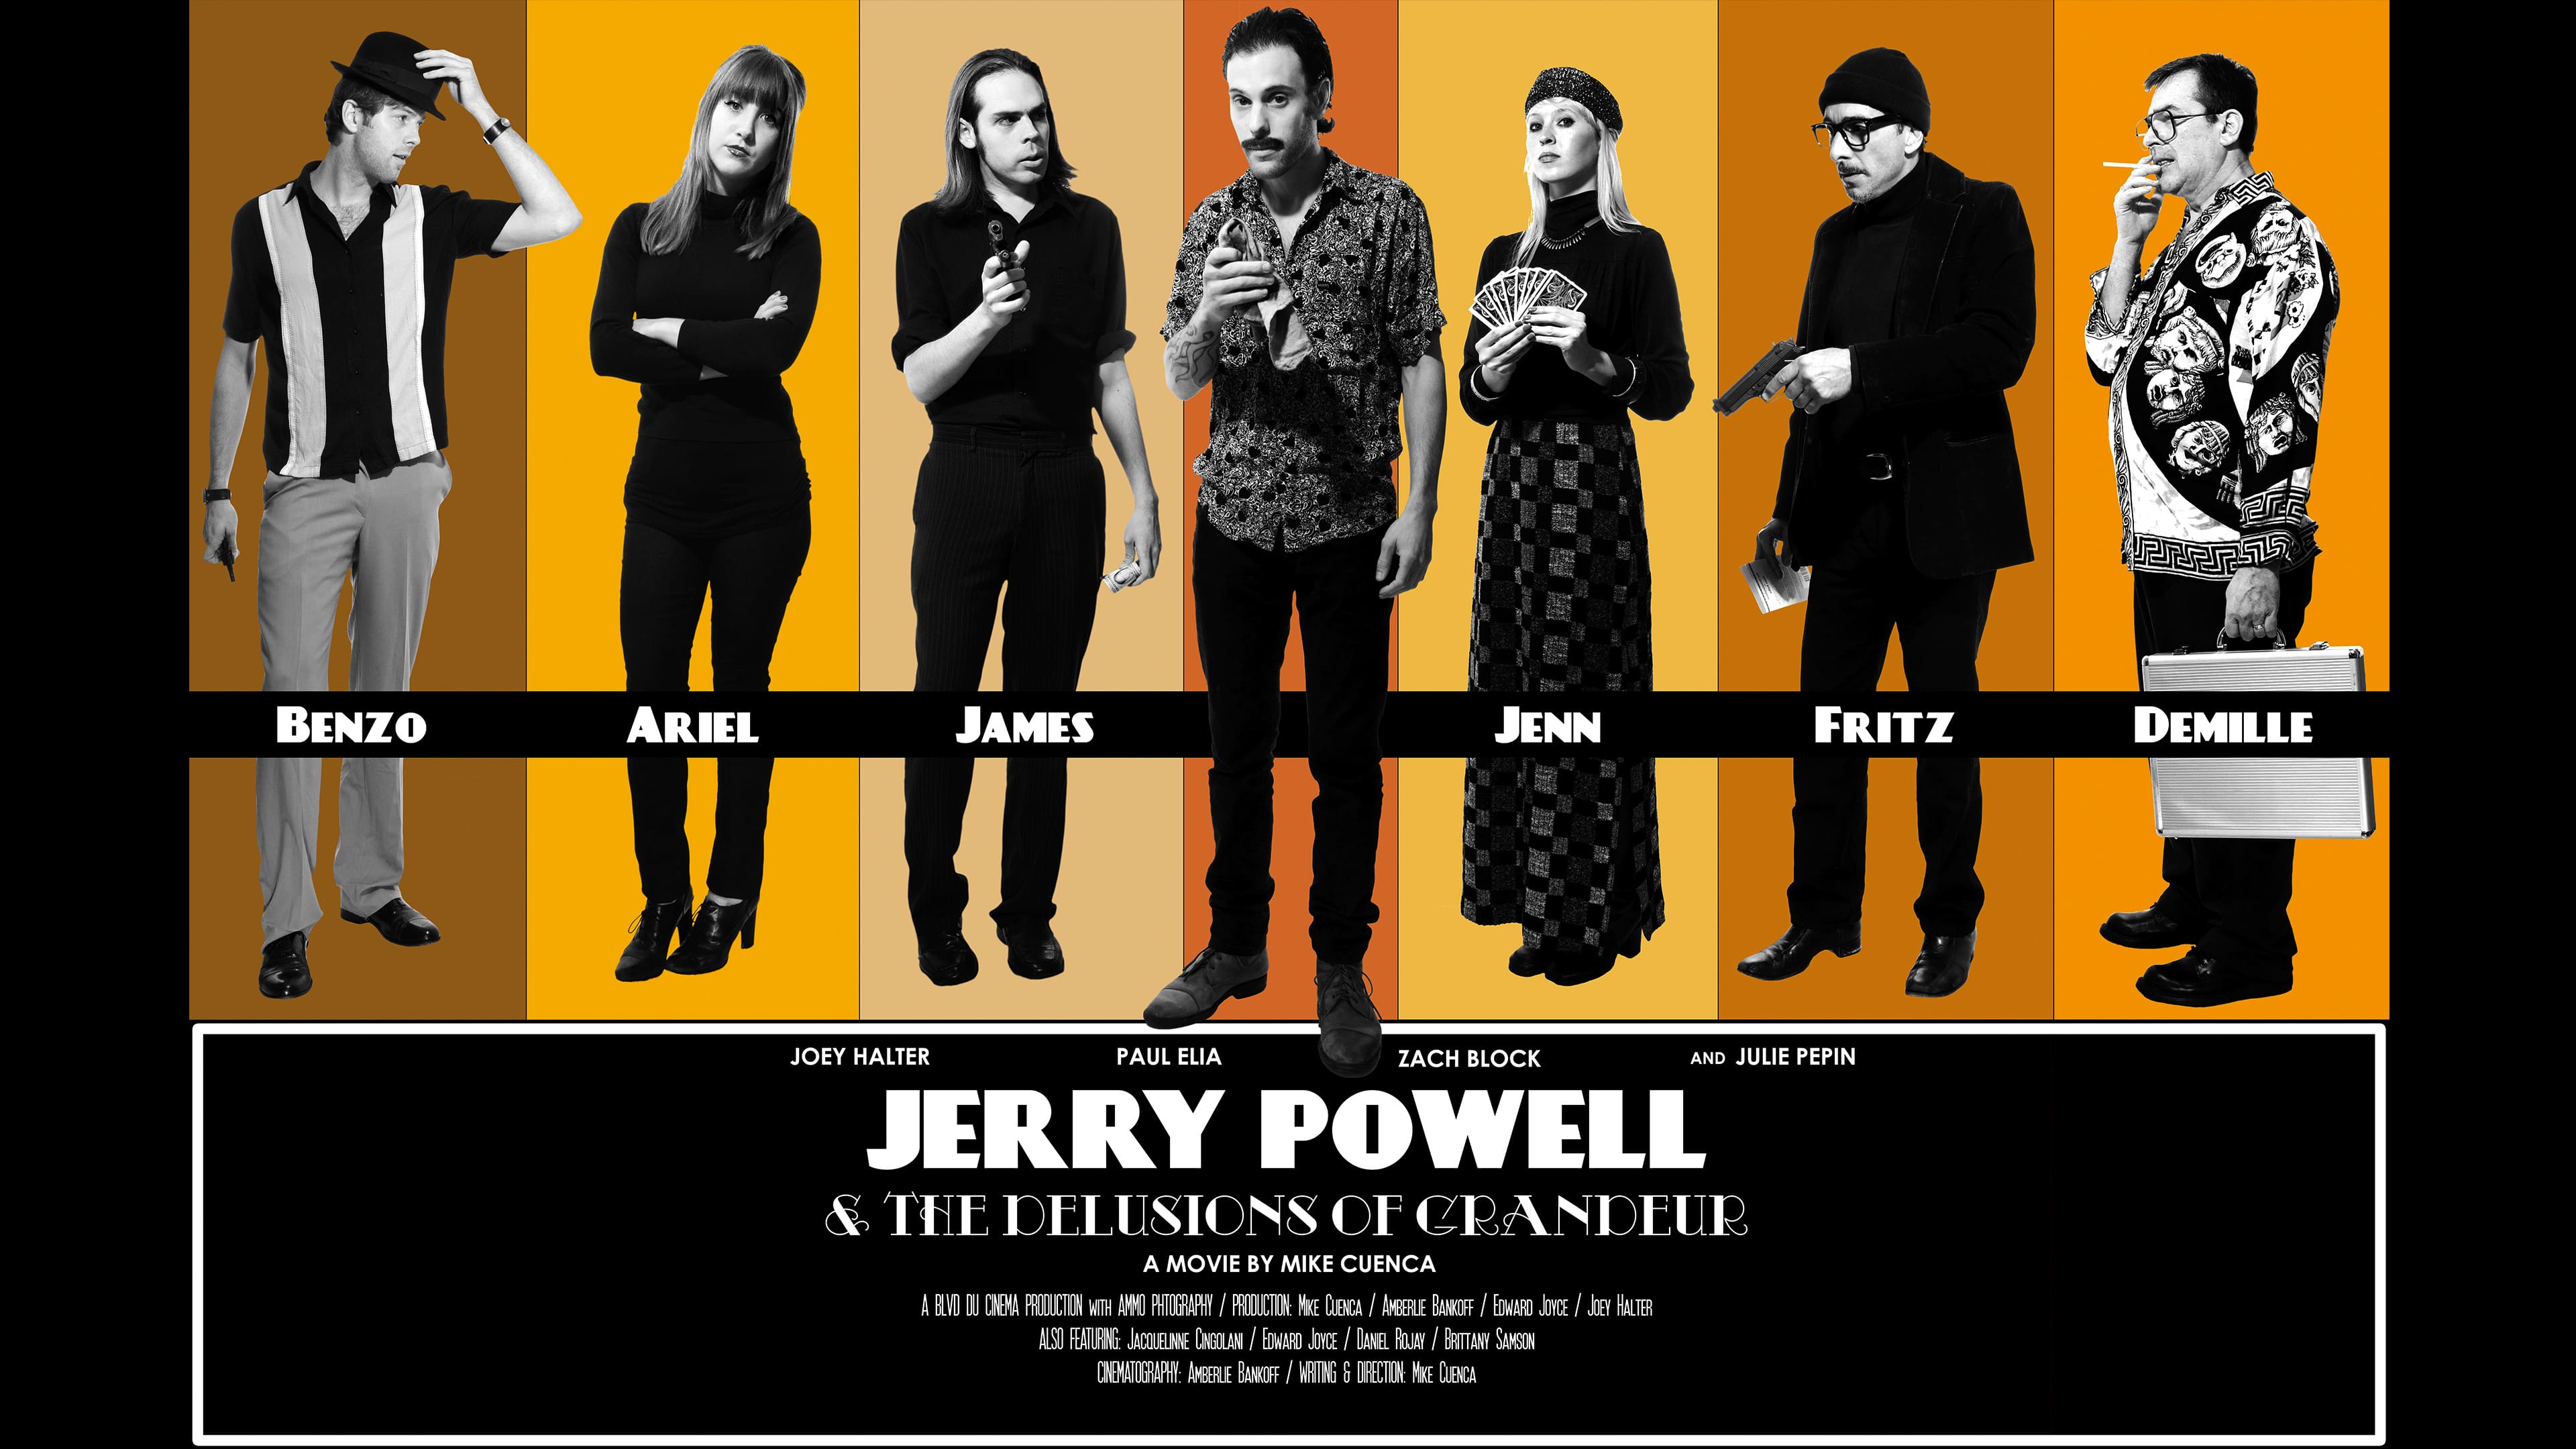 Jerry Powell & the Delusions of Grandeur - film